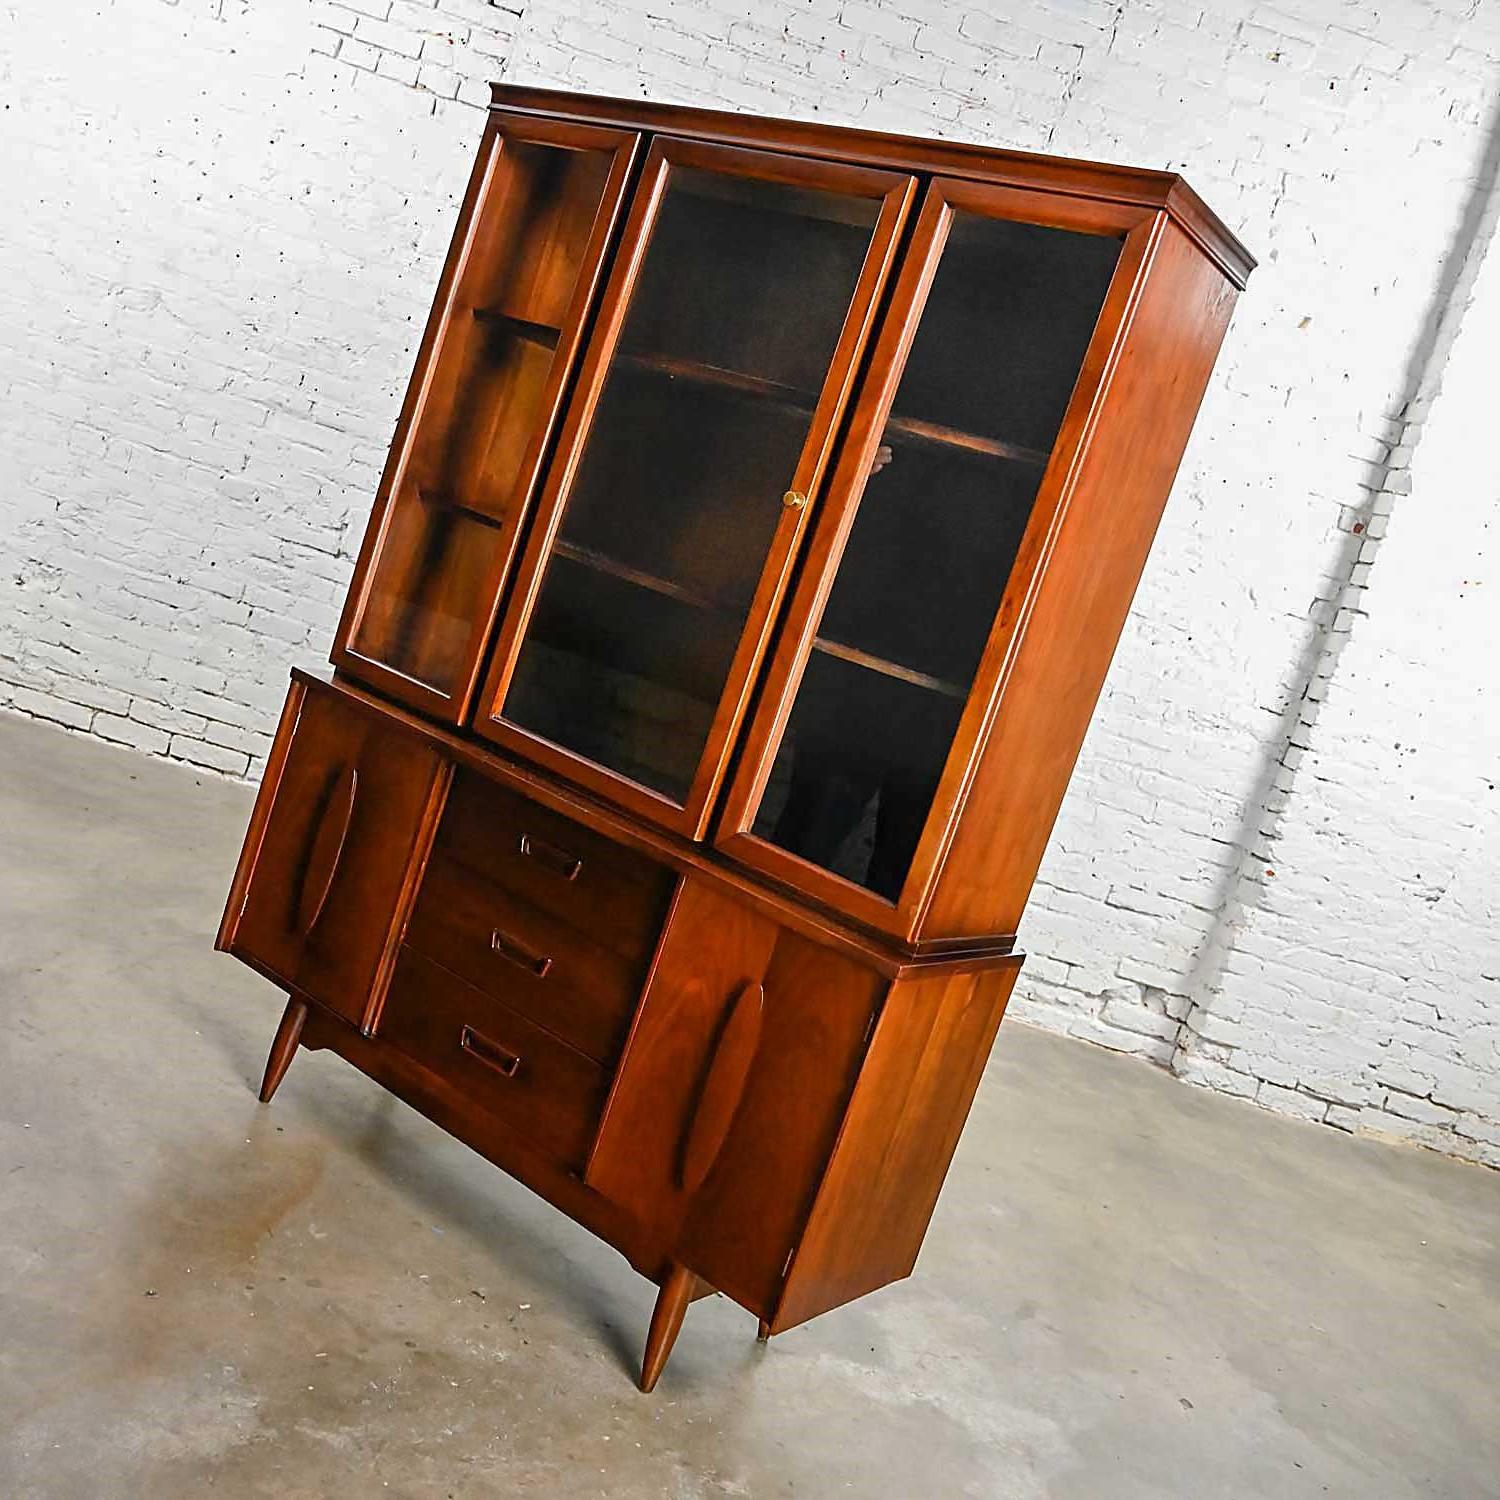 Wonderful mid-century modern 1 piece walnut veneer china hutch, display cabinet, or bookcase Attributed to Garrison Furniture. Beautiful condition, keeping in mind that this is vintage and not new so will have signs of use and wear. There are 3